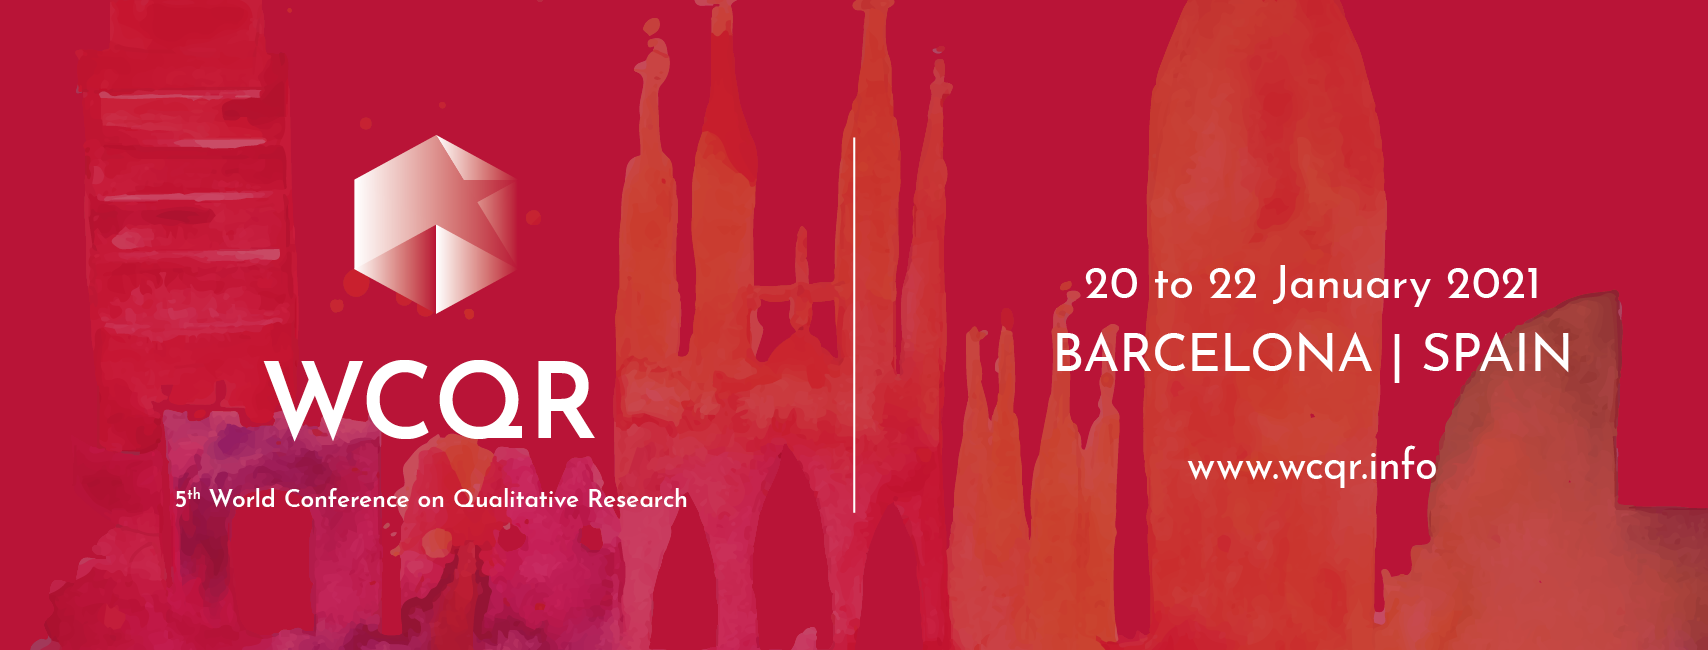 5th World Conference on Qualitative Research (WCQR2021), Barcelona, Cataluna, Spain